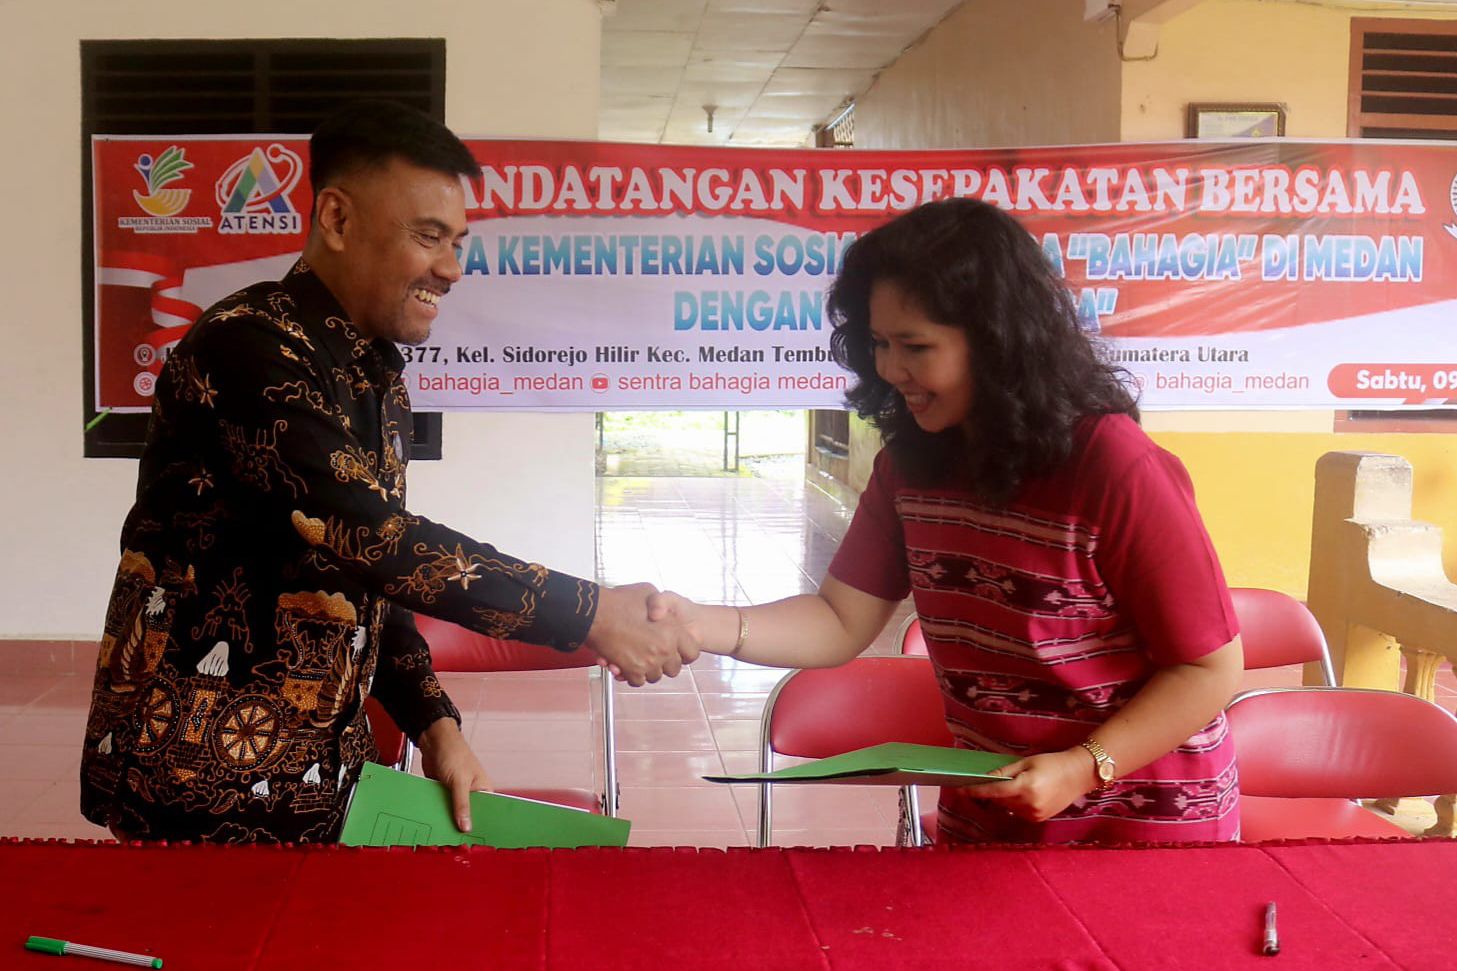 48 Persons with Disabilities and 40 Elderly Persons Got ATENSI Assistance from Bahagia Center in Medan in Karo Regency